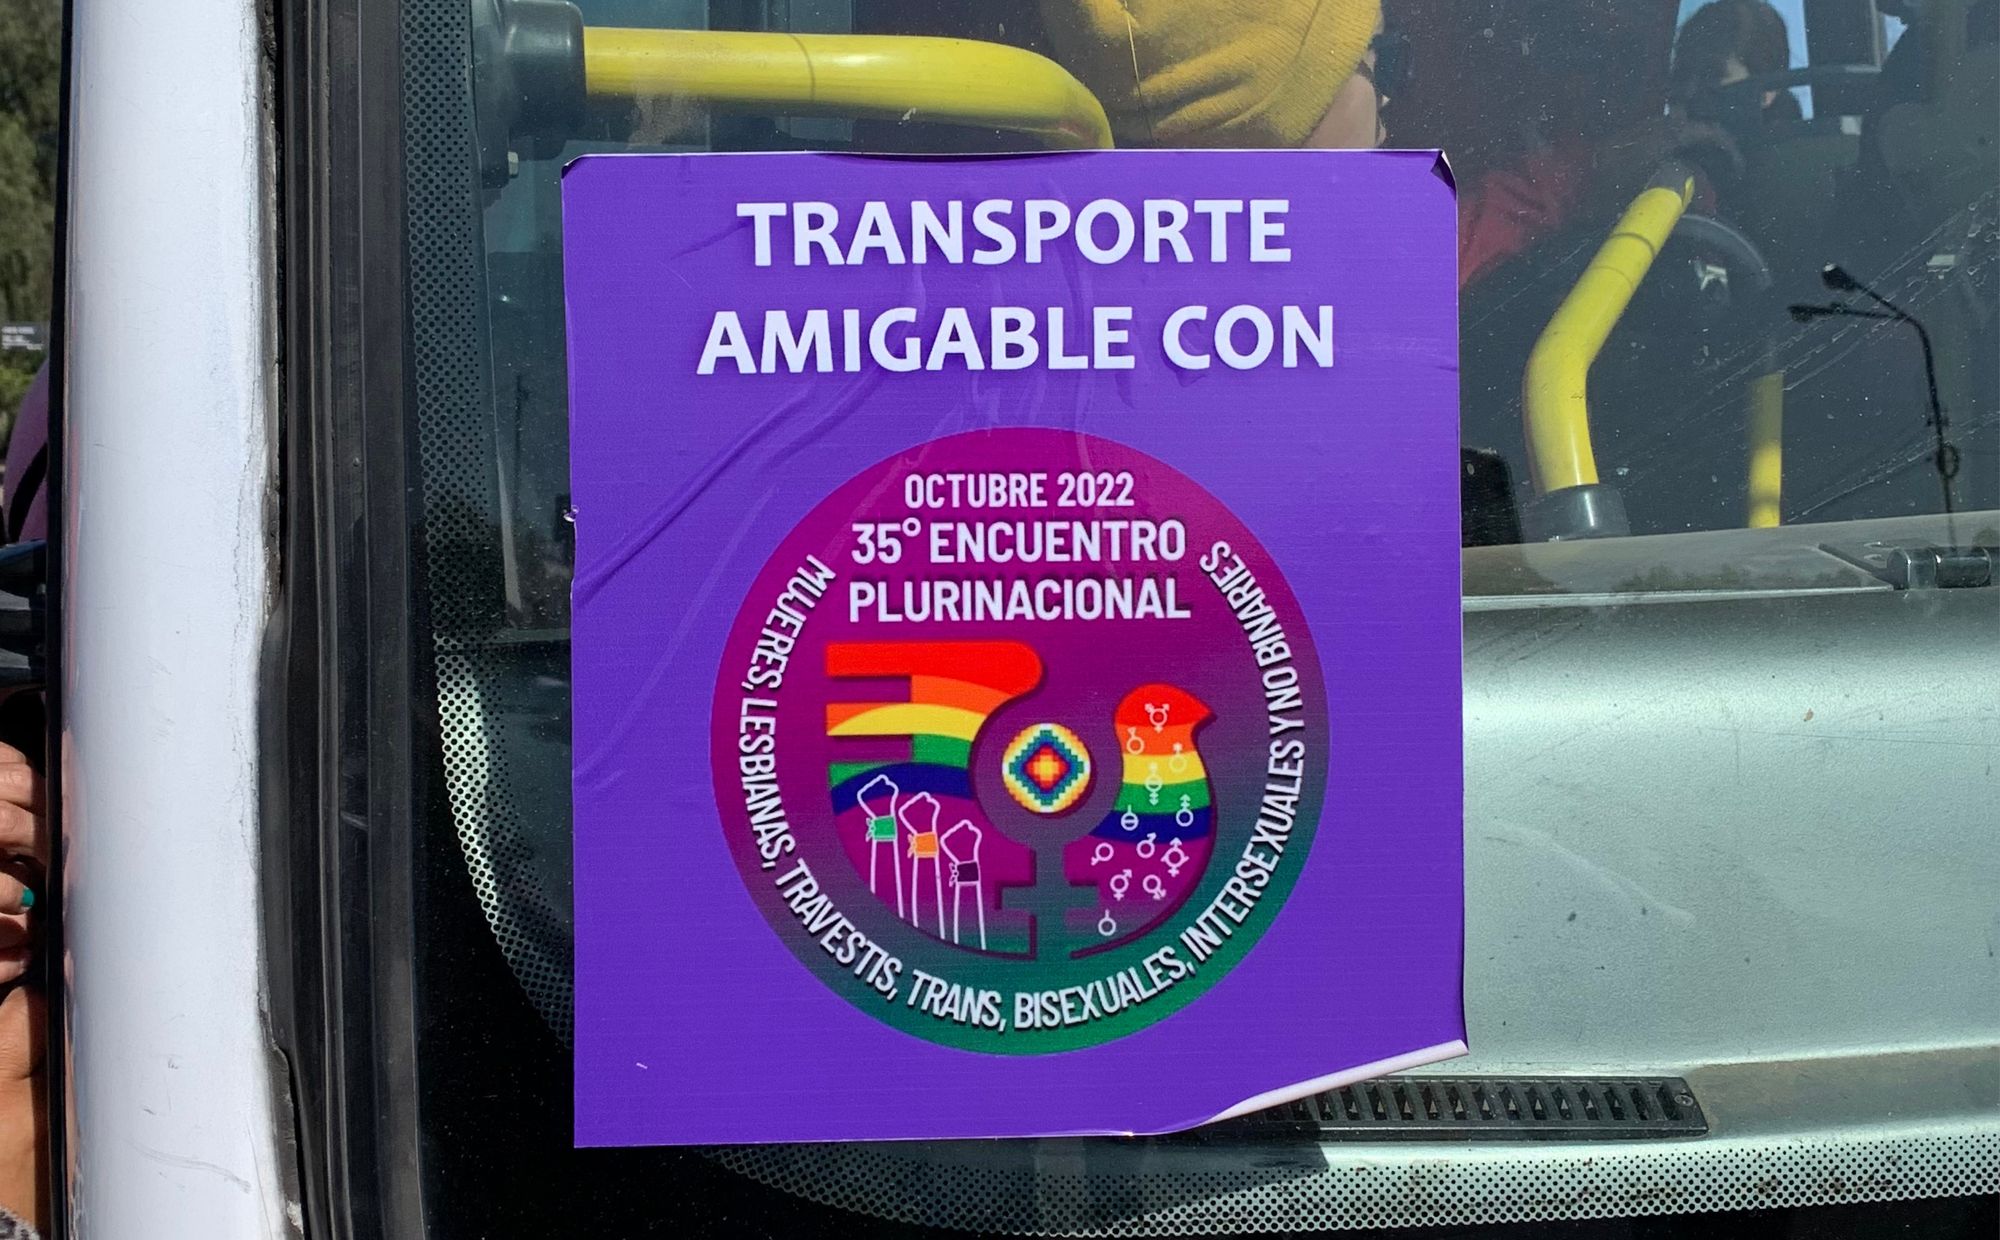 Sticker with the logo of the 35th Encuentro. The logo shows a rainbow-striped dove with symbols of the various genders and three raised fists. 